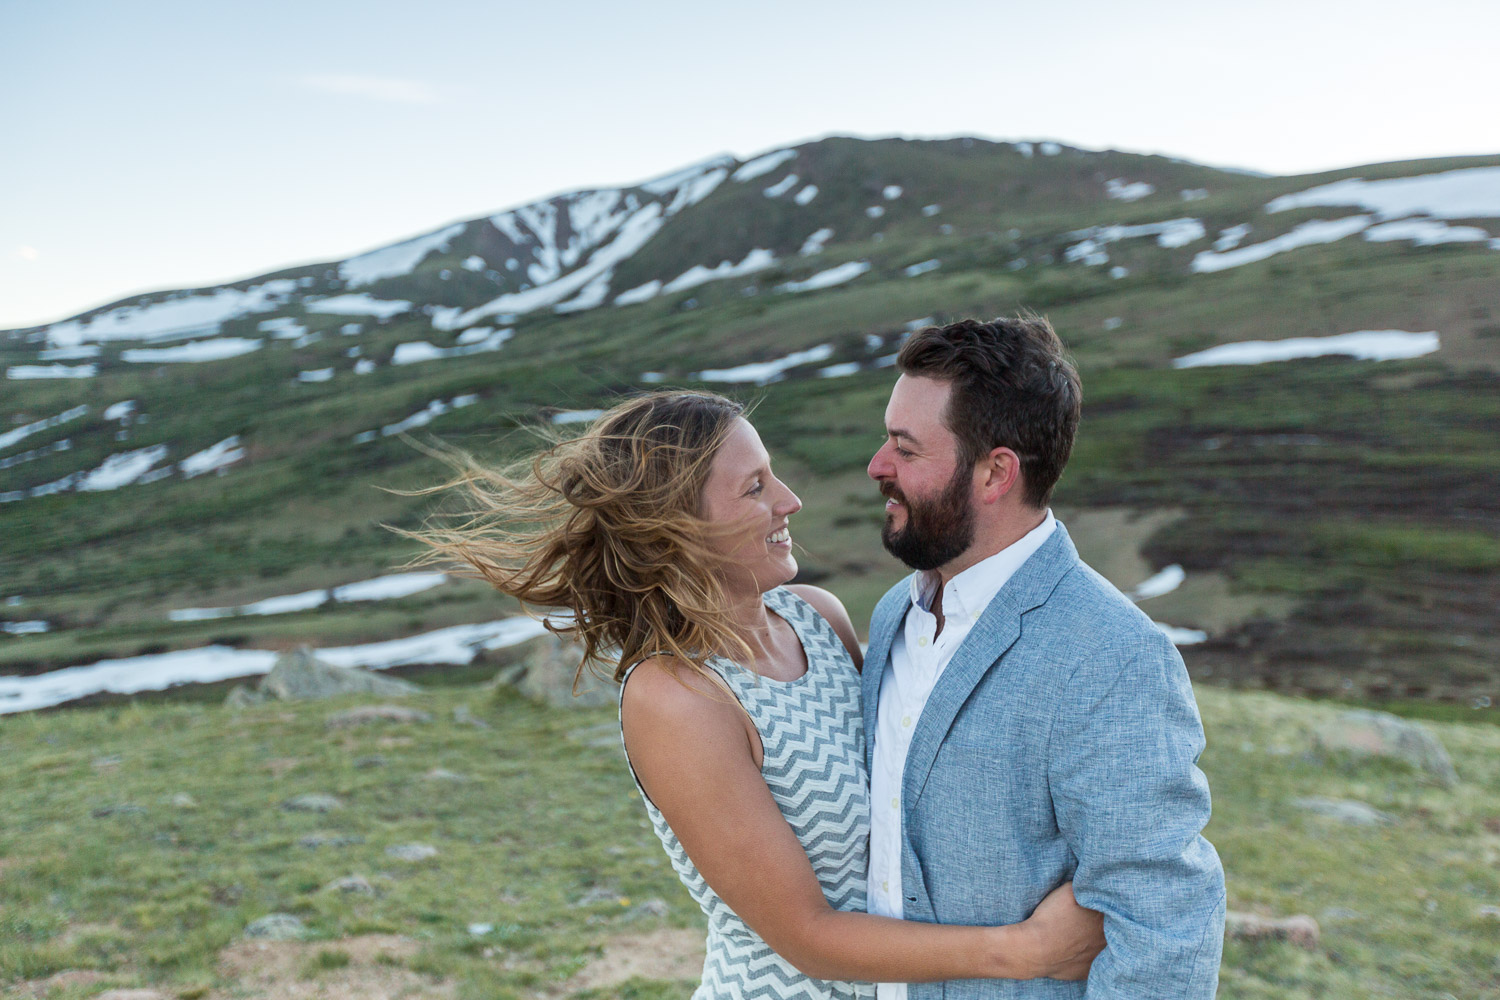 Colorado Mountain Engagement Session with Mountain Views